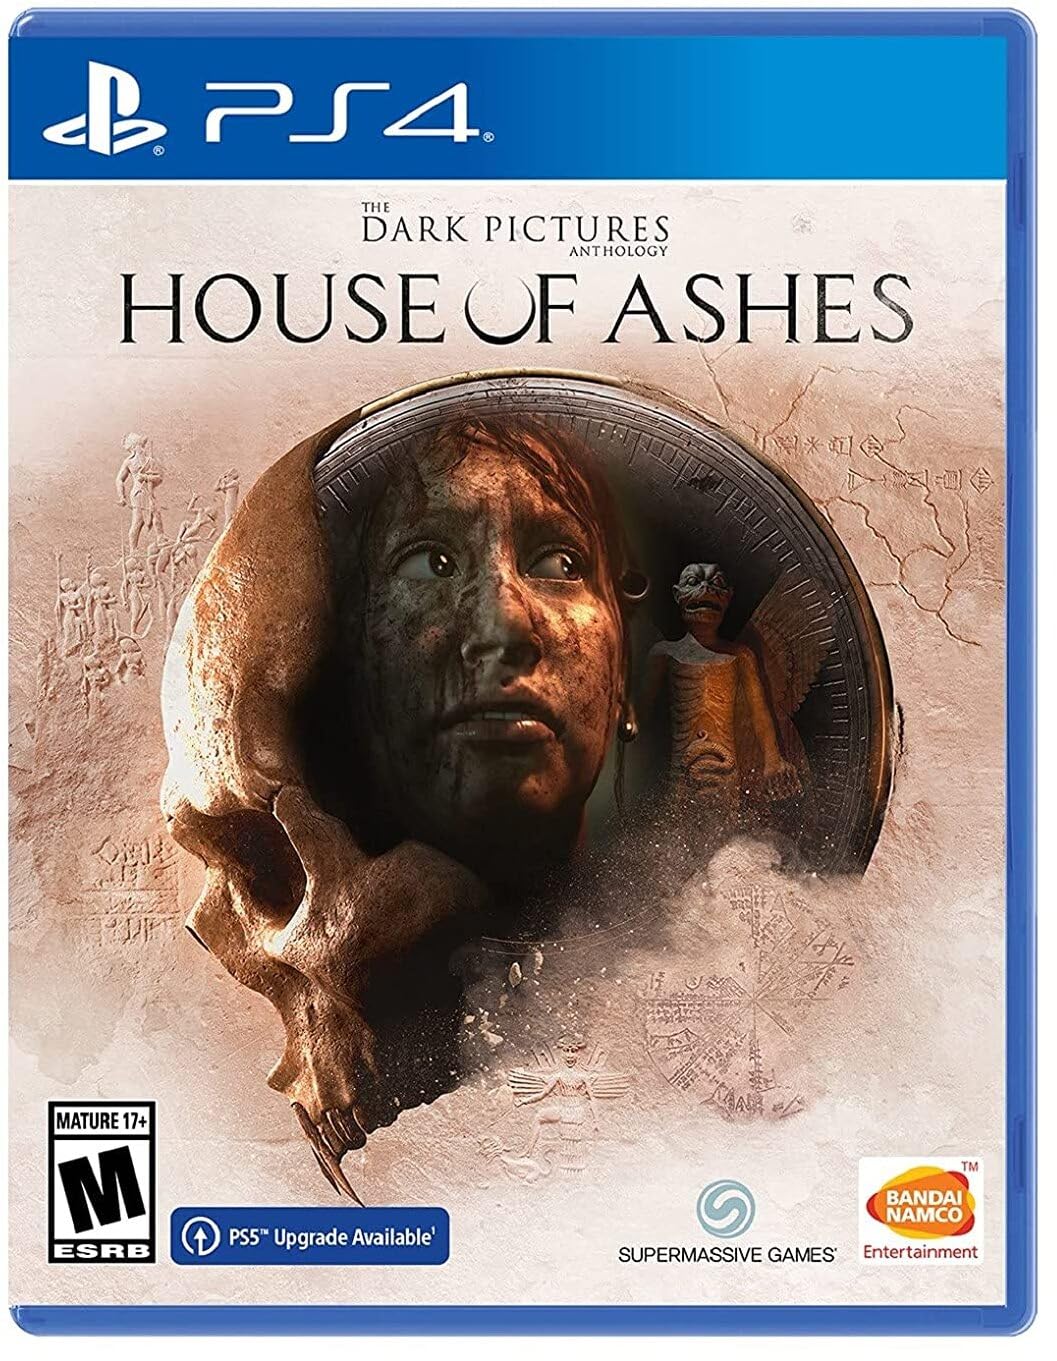 The Dark Pictures: House of Ashes(A:k)- PS4